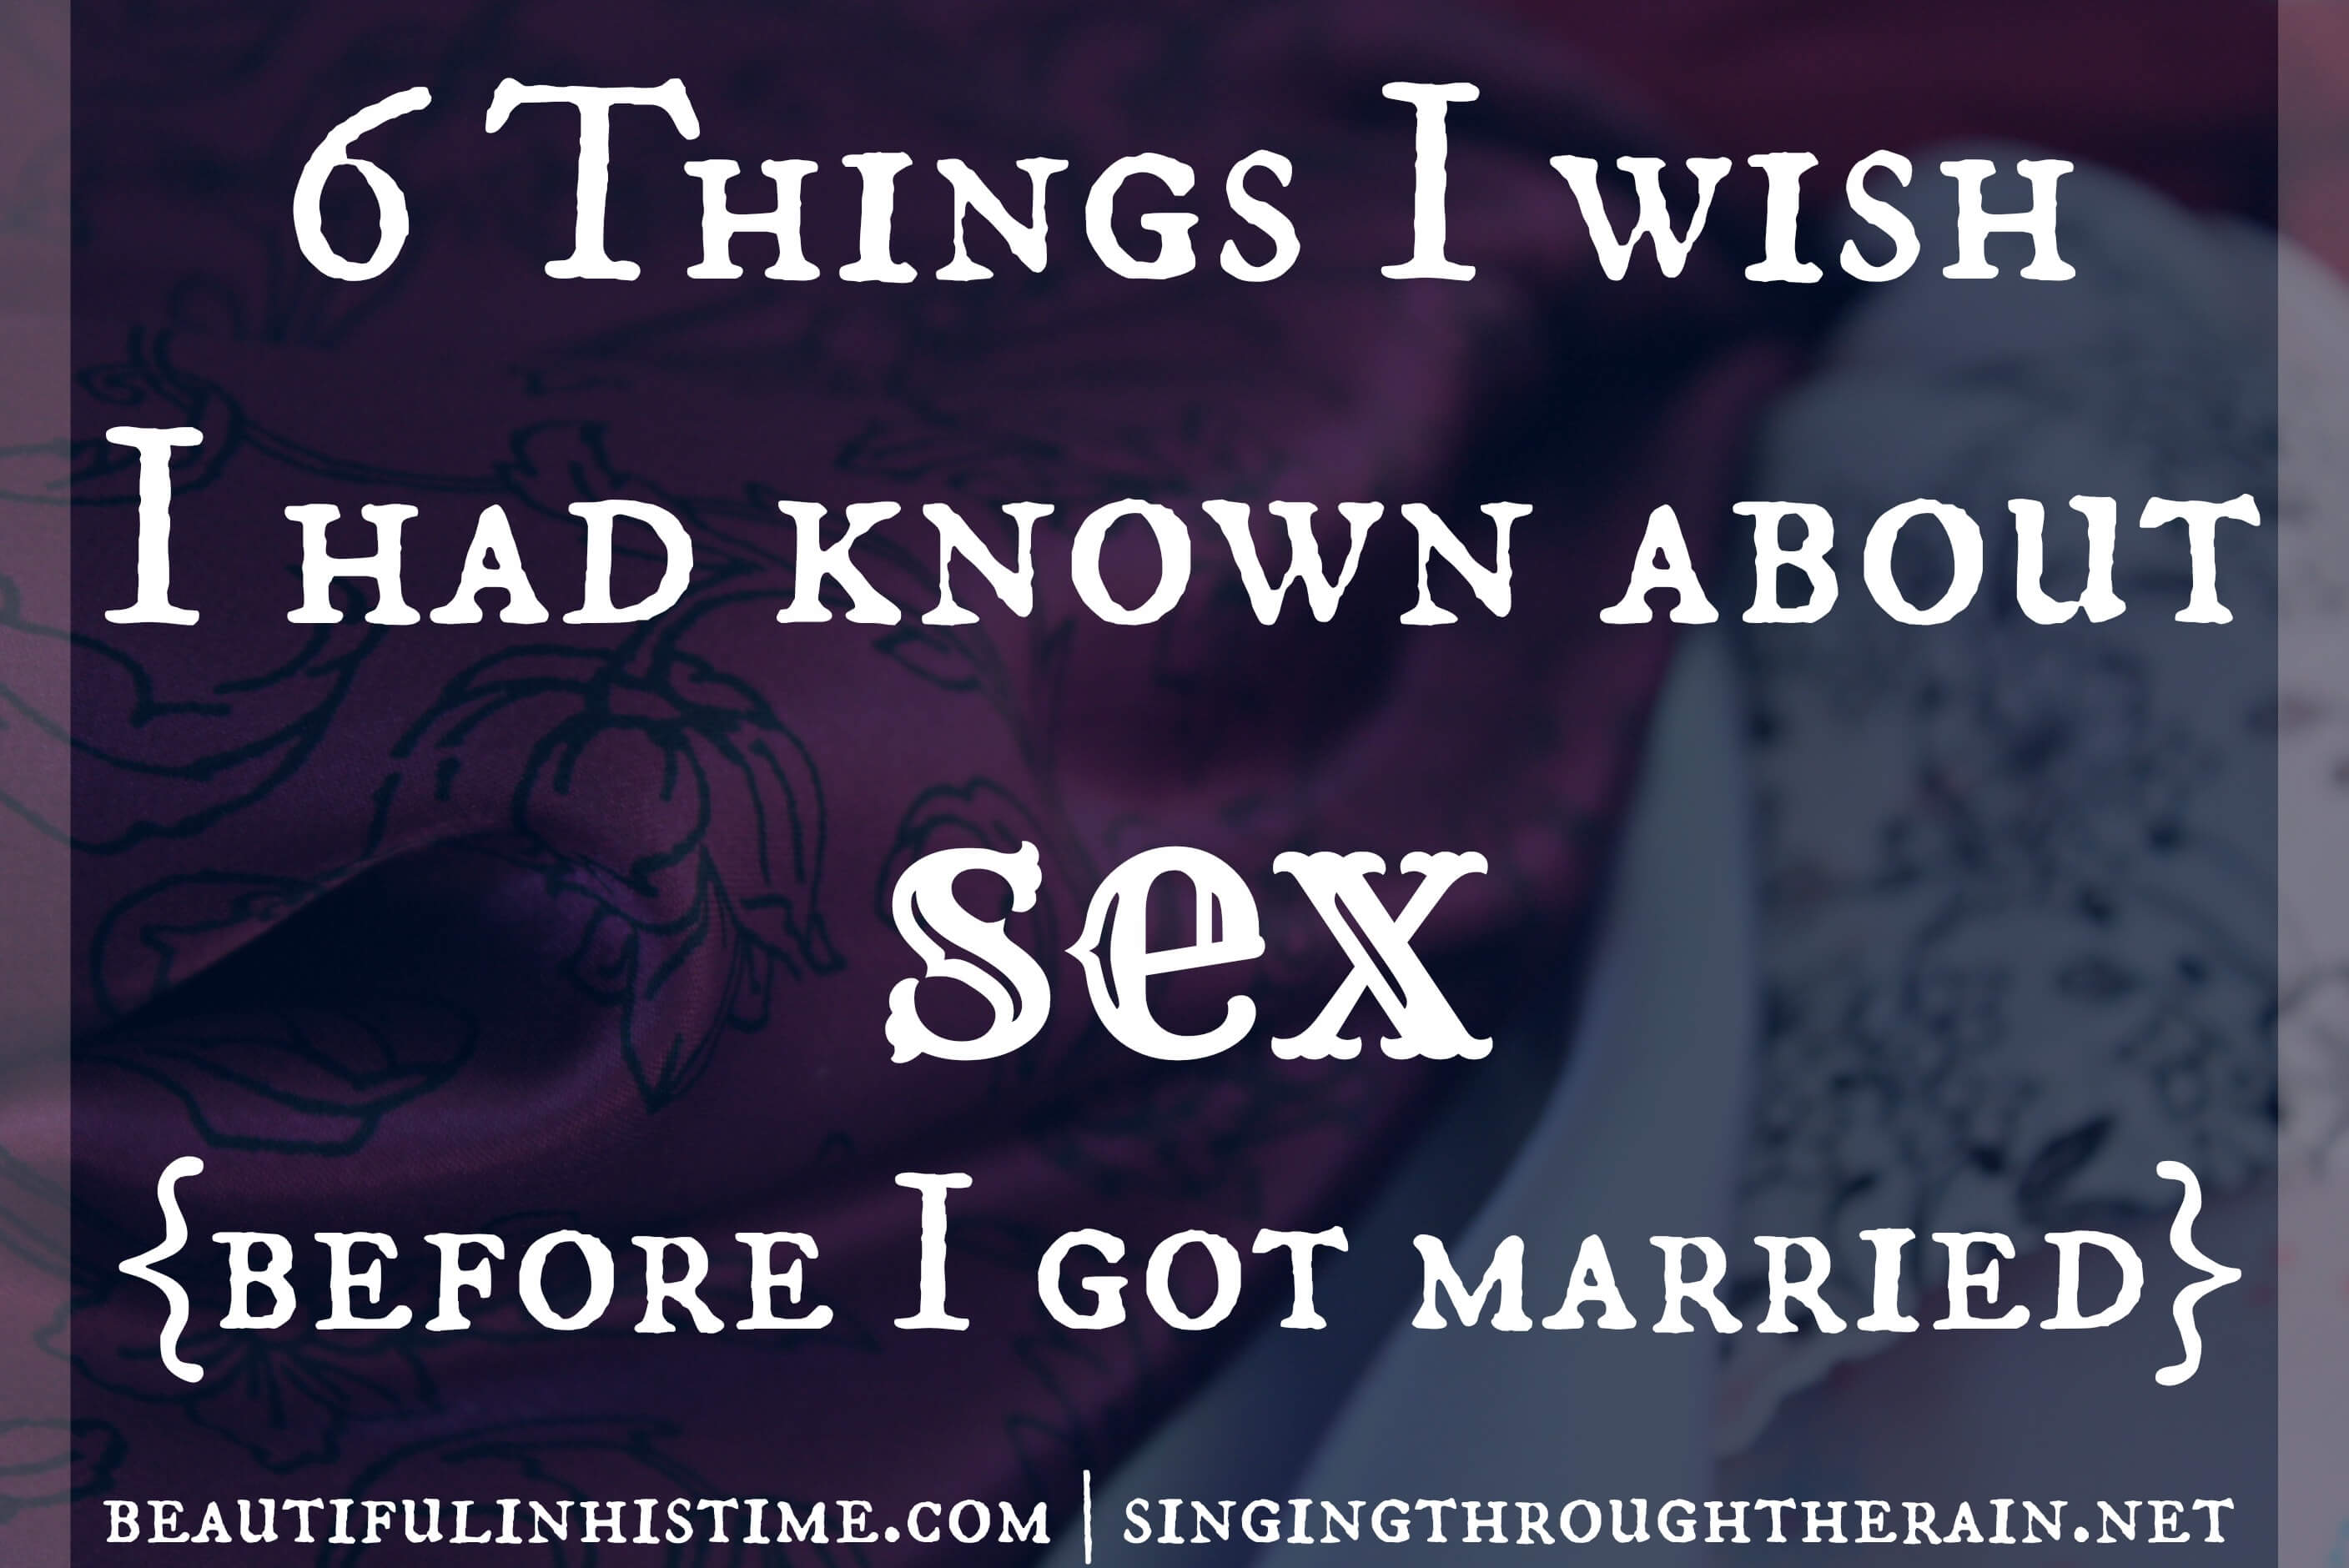 6 Things I Wish I Had Known About Sex (Before I Got Married)